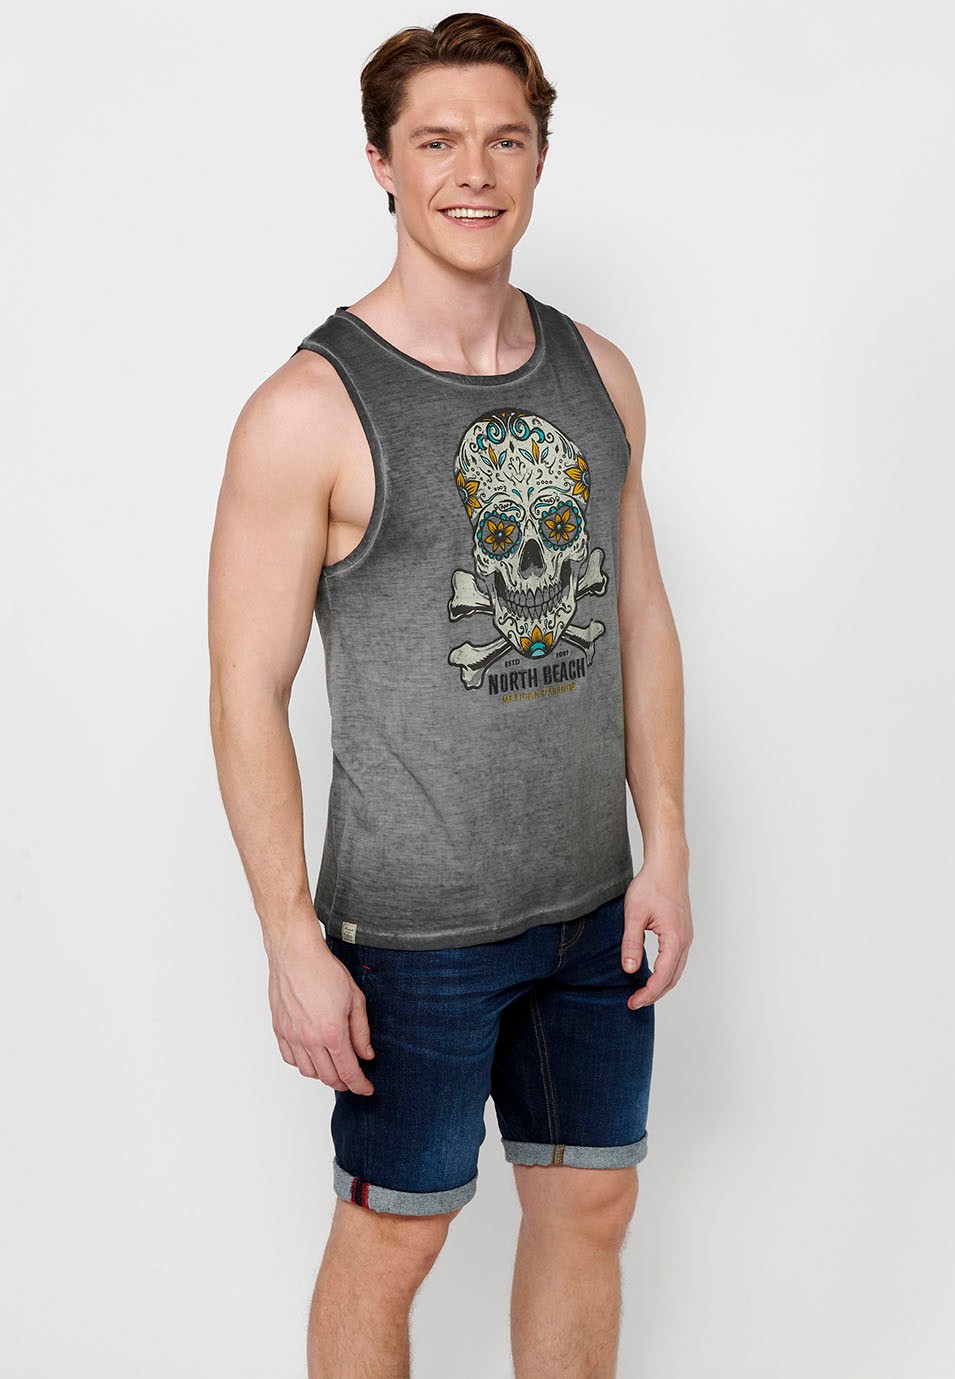 Cotton tank top, with front print, gray color for men